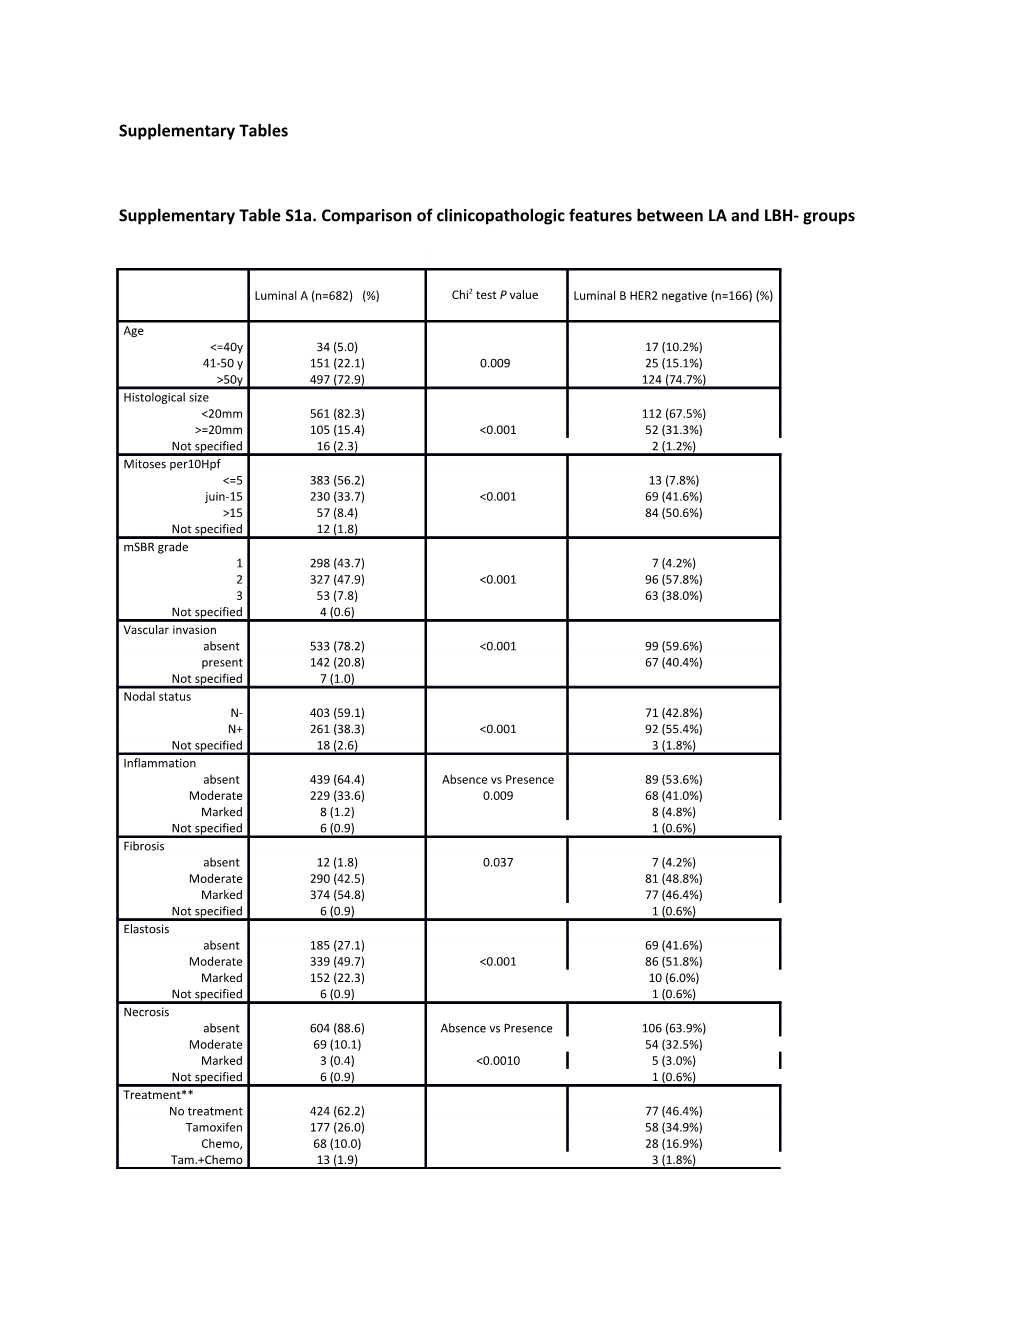 Supplementary Table S1a.Comparison of Clinicopathologic Features Between LA and LBH- Groups